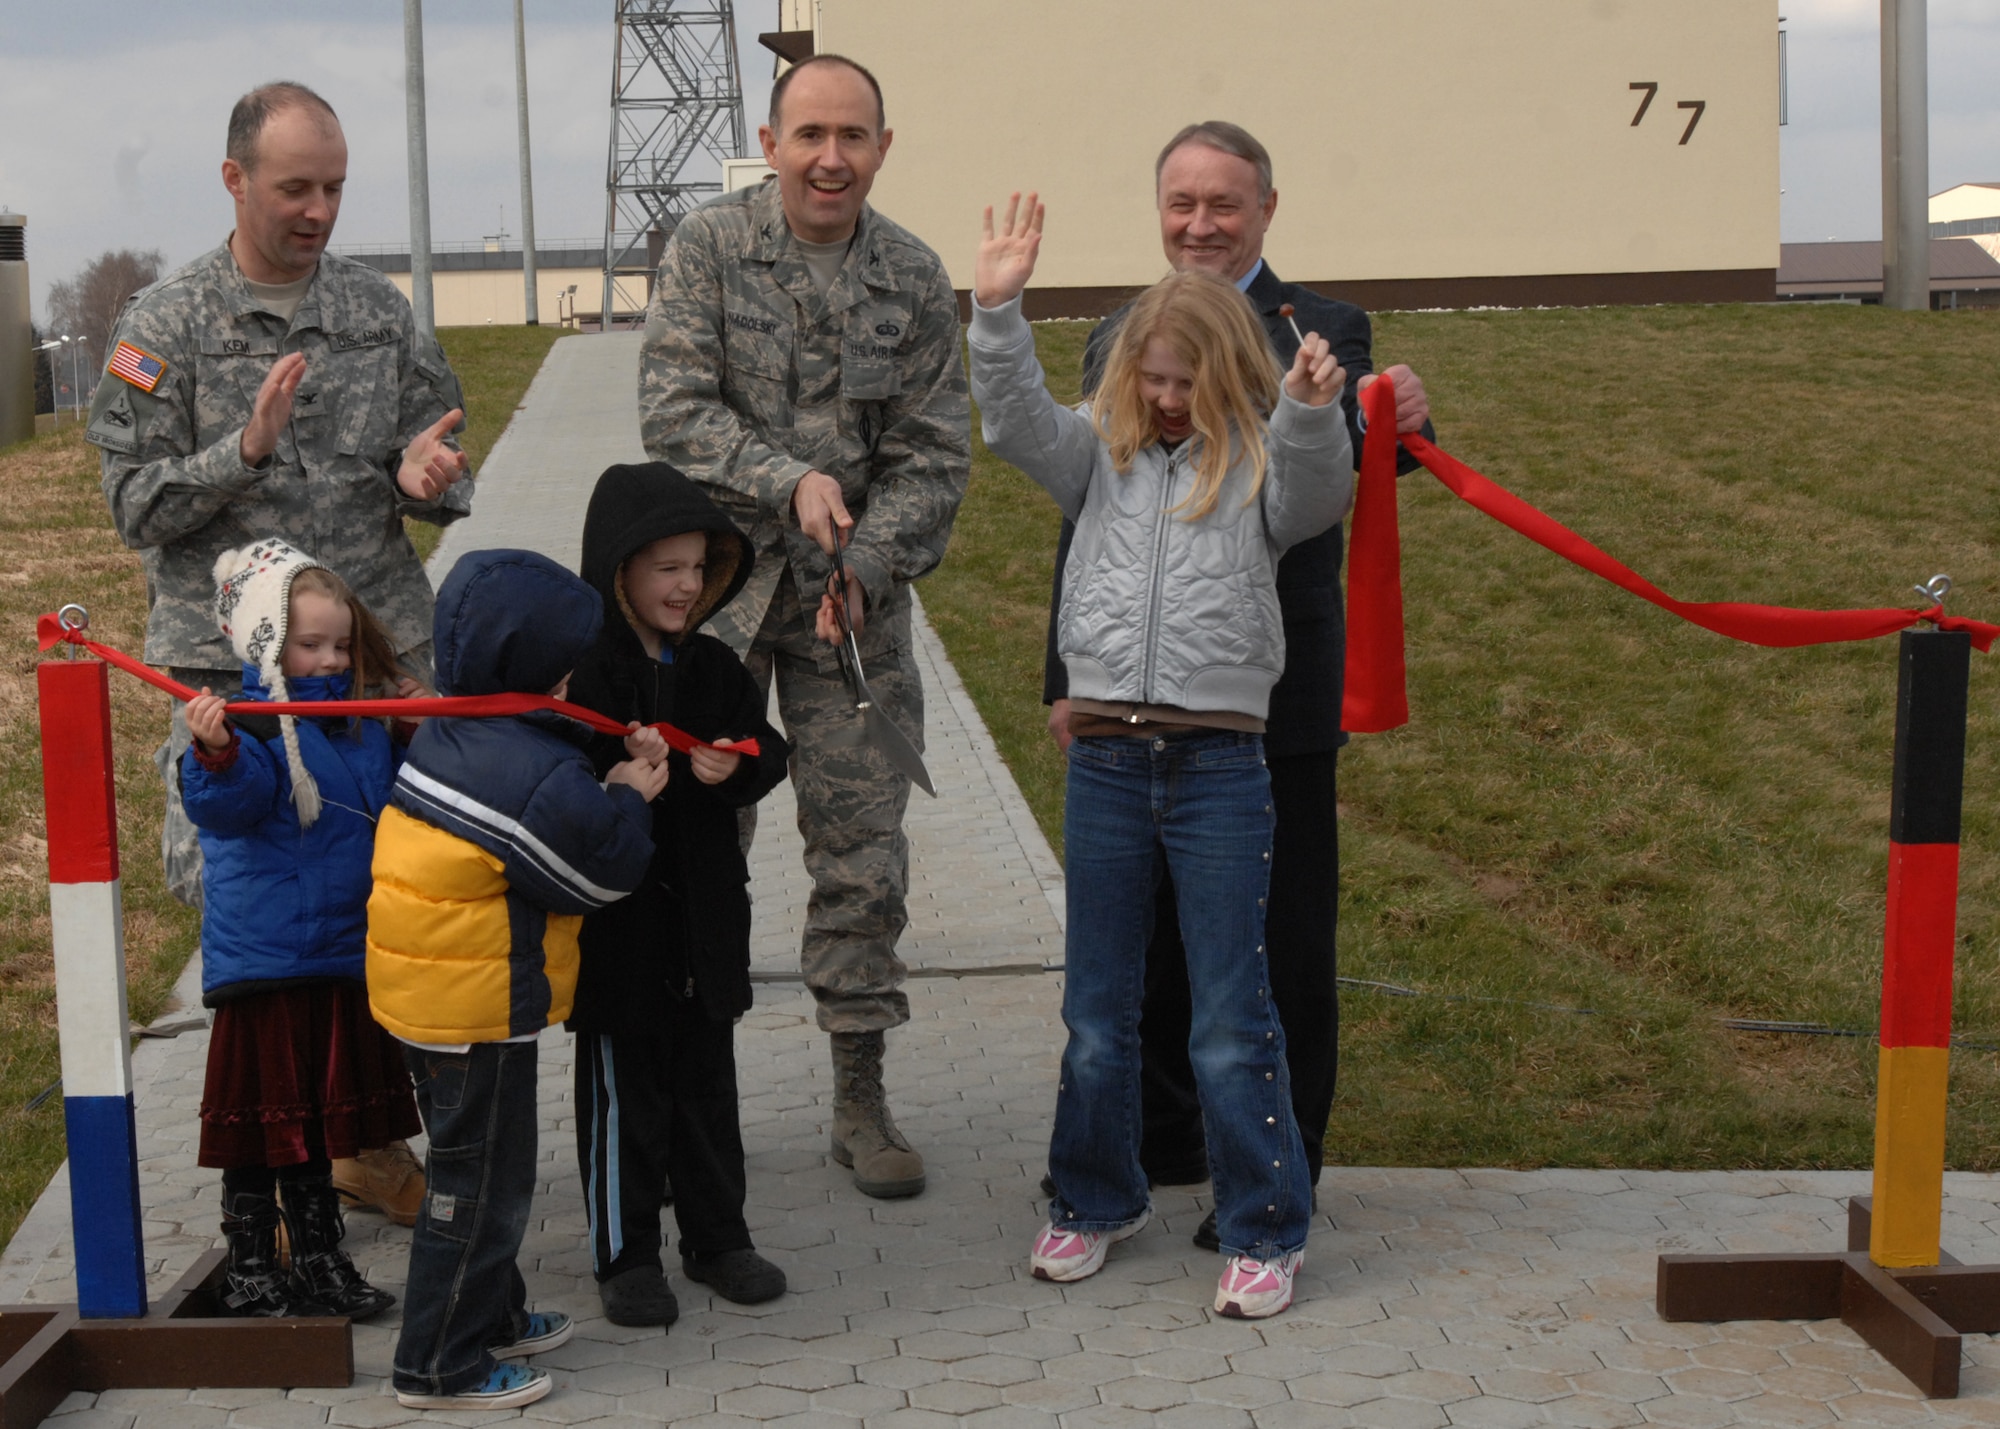 SPANGDAHLEM AIR BASE, Germany -- Col. William Nadolski, 52nd Fighter Wing vice commander, along with members of the Army Corps of Engineers and children of wing leadership cut a ribbon during the for the new air traffic control tower March 13, 2009.  After the ceremony visitors were given a chance to look at the new tower which provides air traffic controllers a view of the entire flight line. (U.S. Air Force photo by Senior Airman Jenifer H. Calhoun)